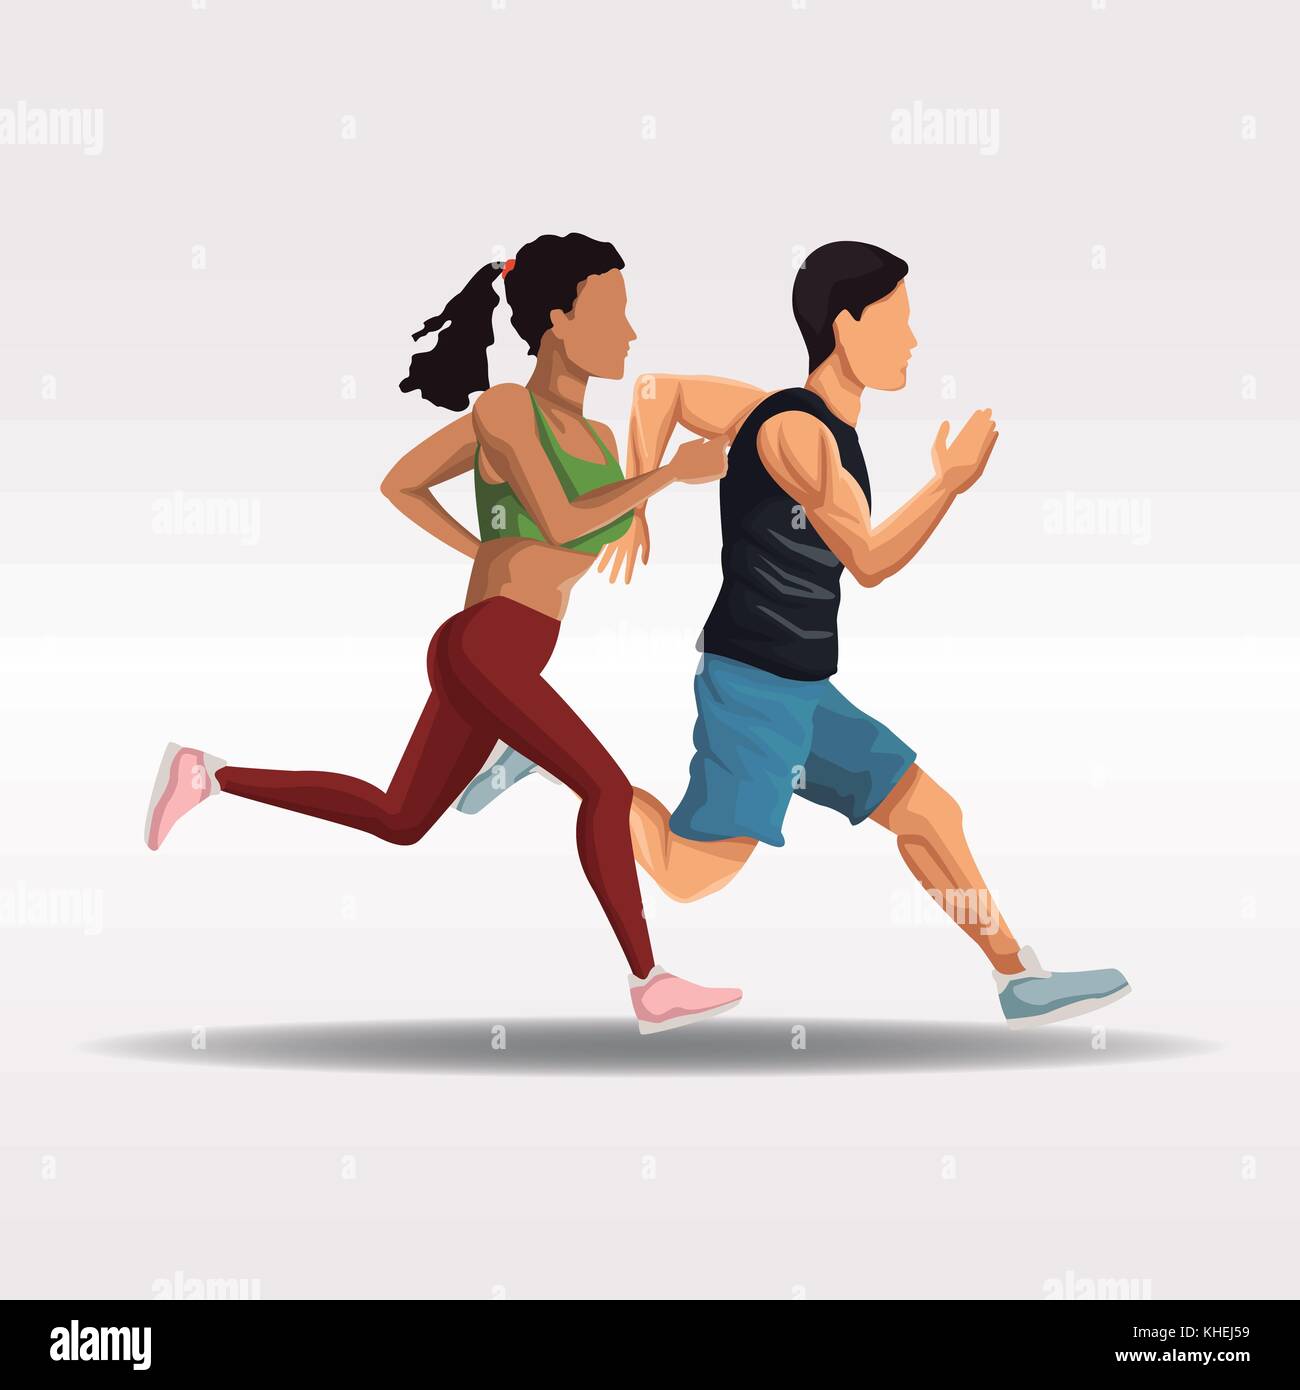 People running fitness lifestyle Stock Vector